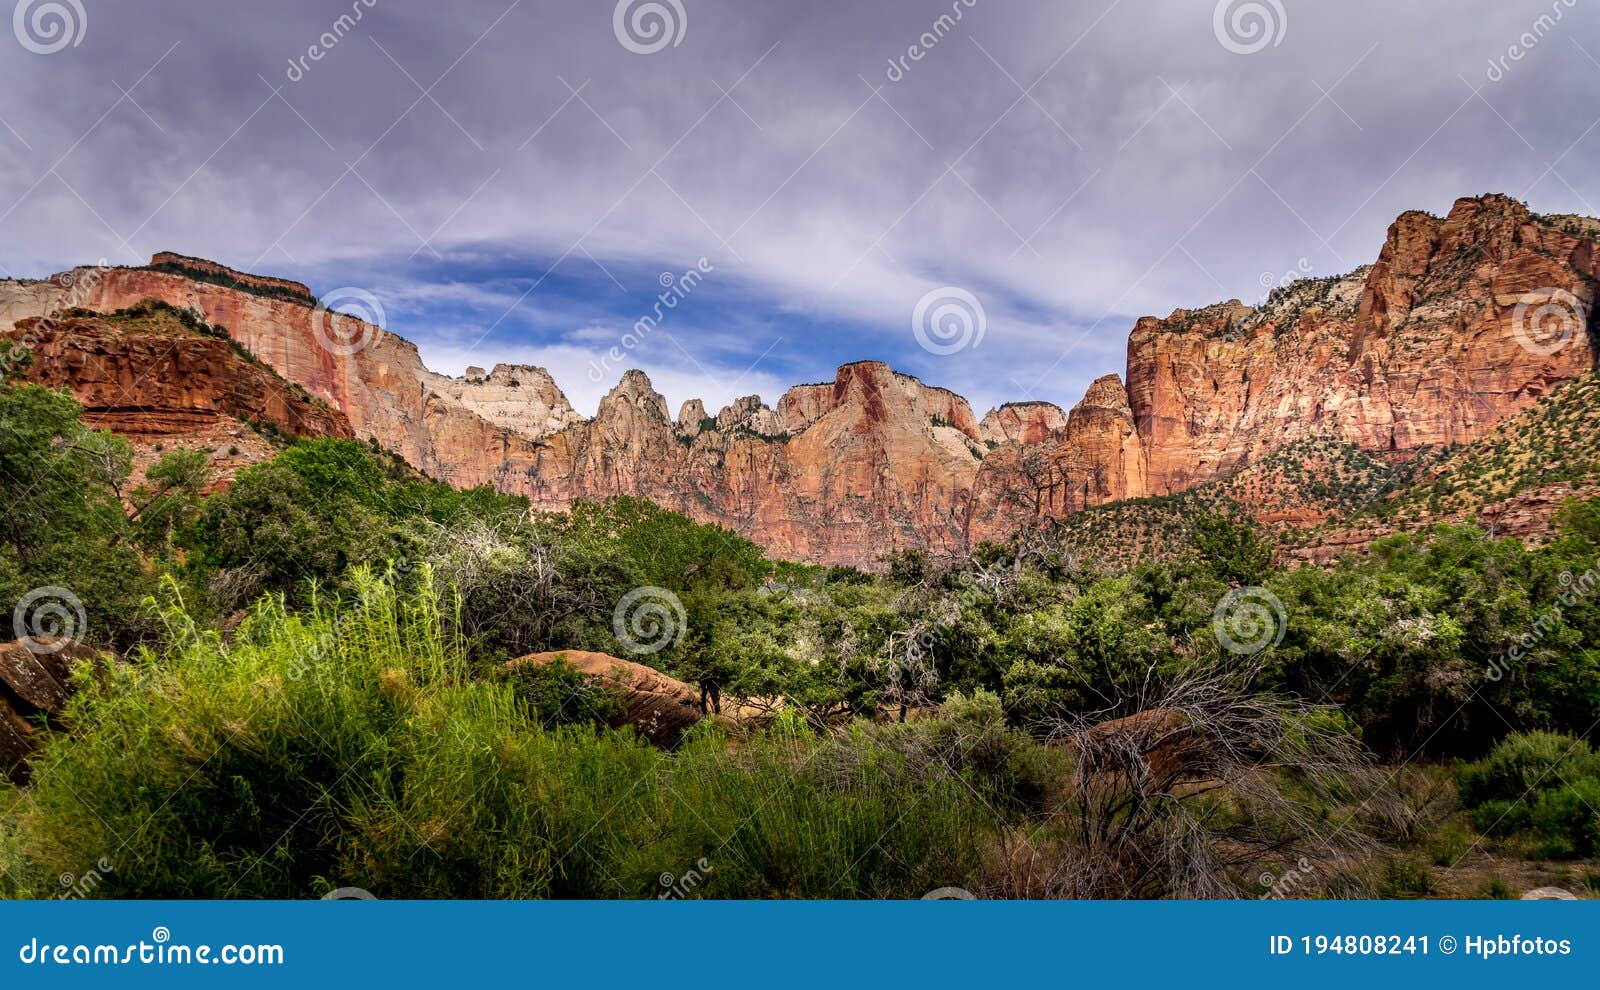 the red sandstone mountains viewed from the pa`rus trail